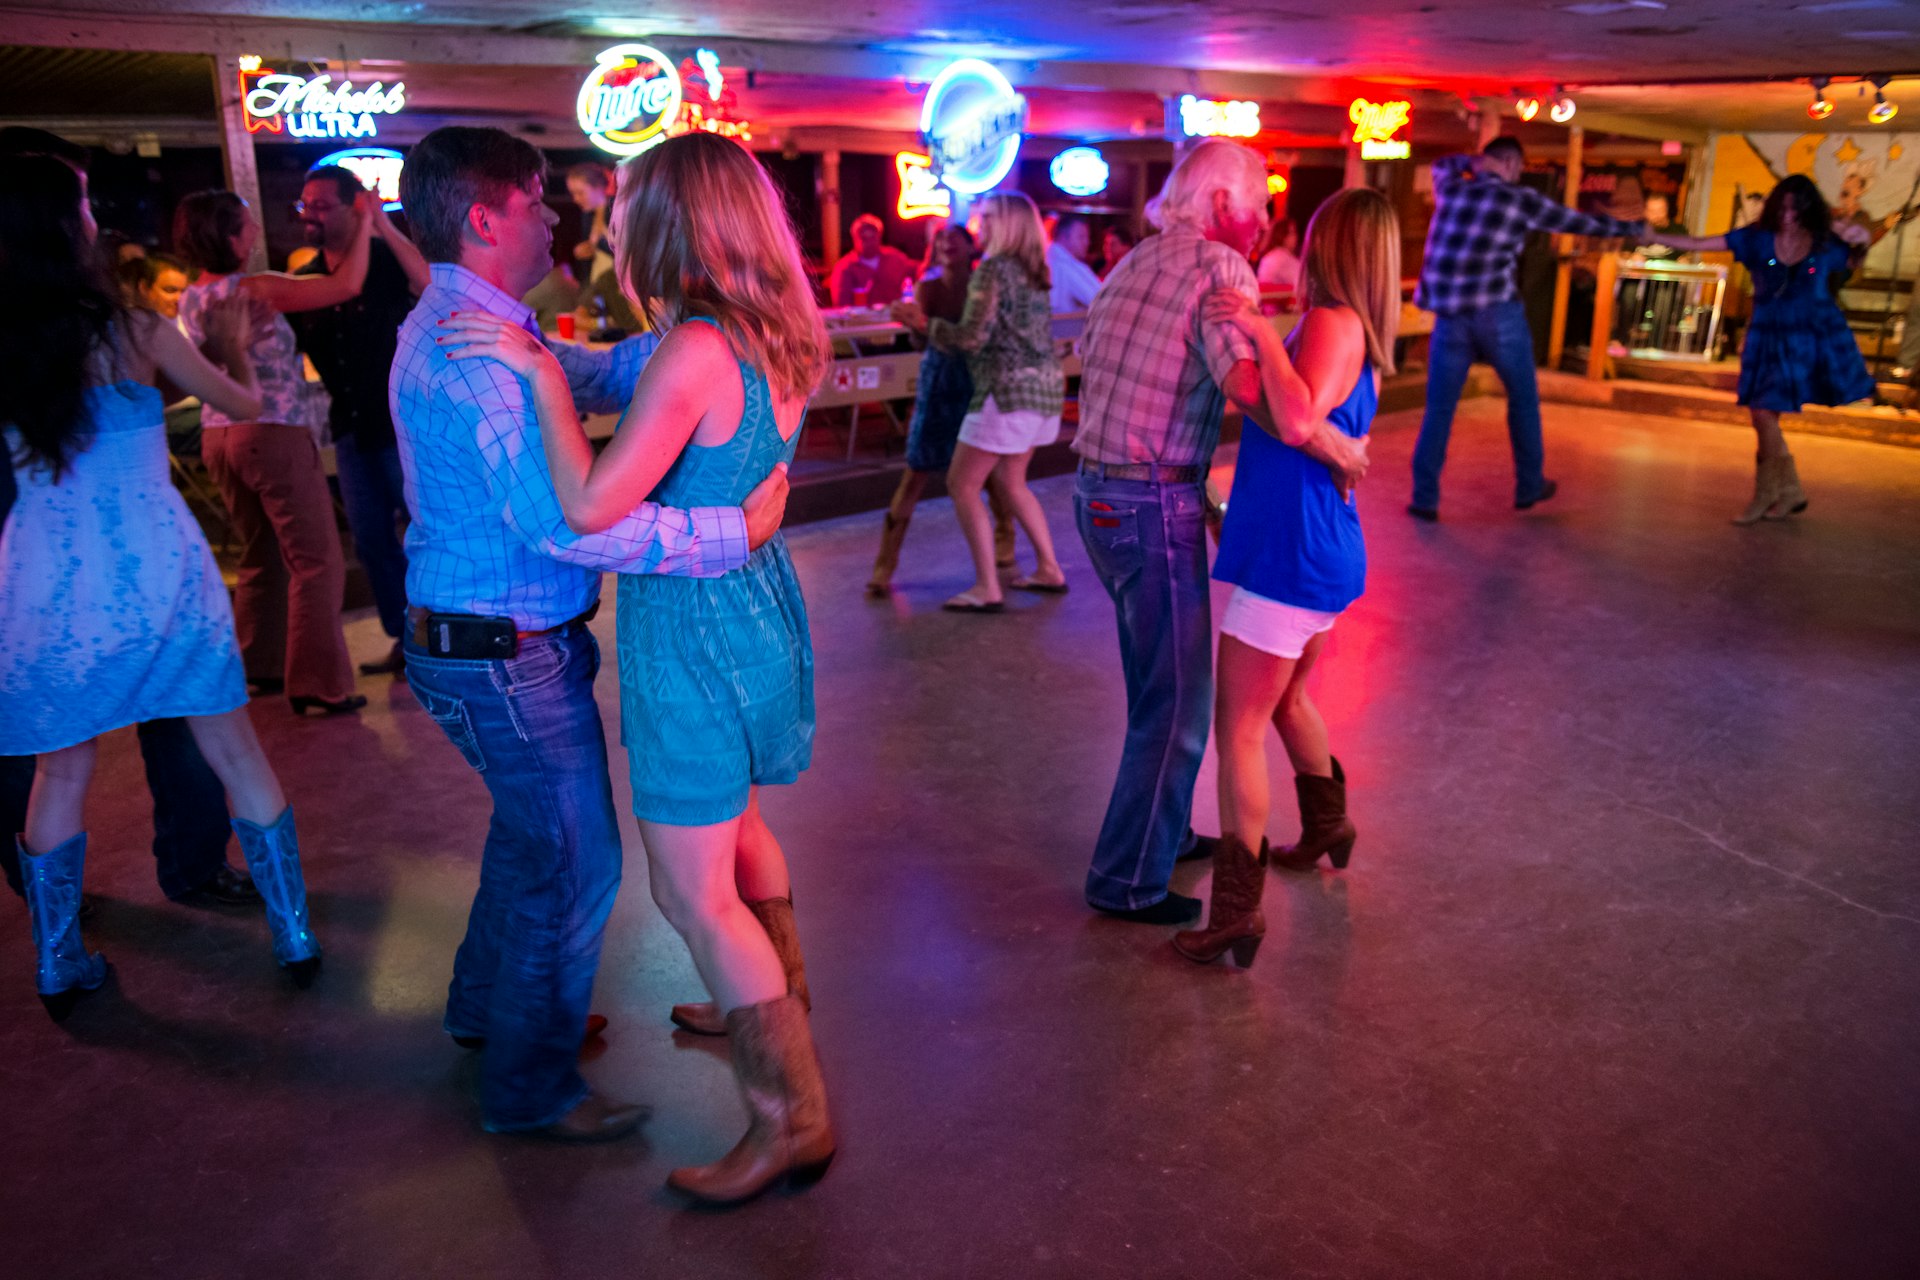 People dancing country music in the Broken Spoke dance hall in Austin, Texas, USA